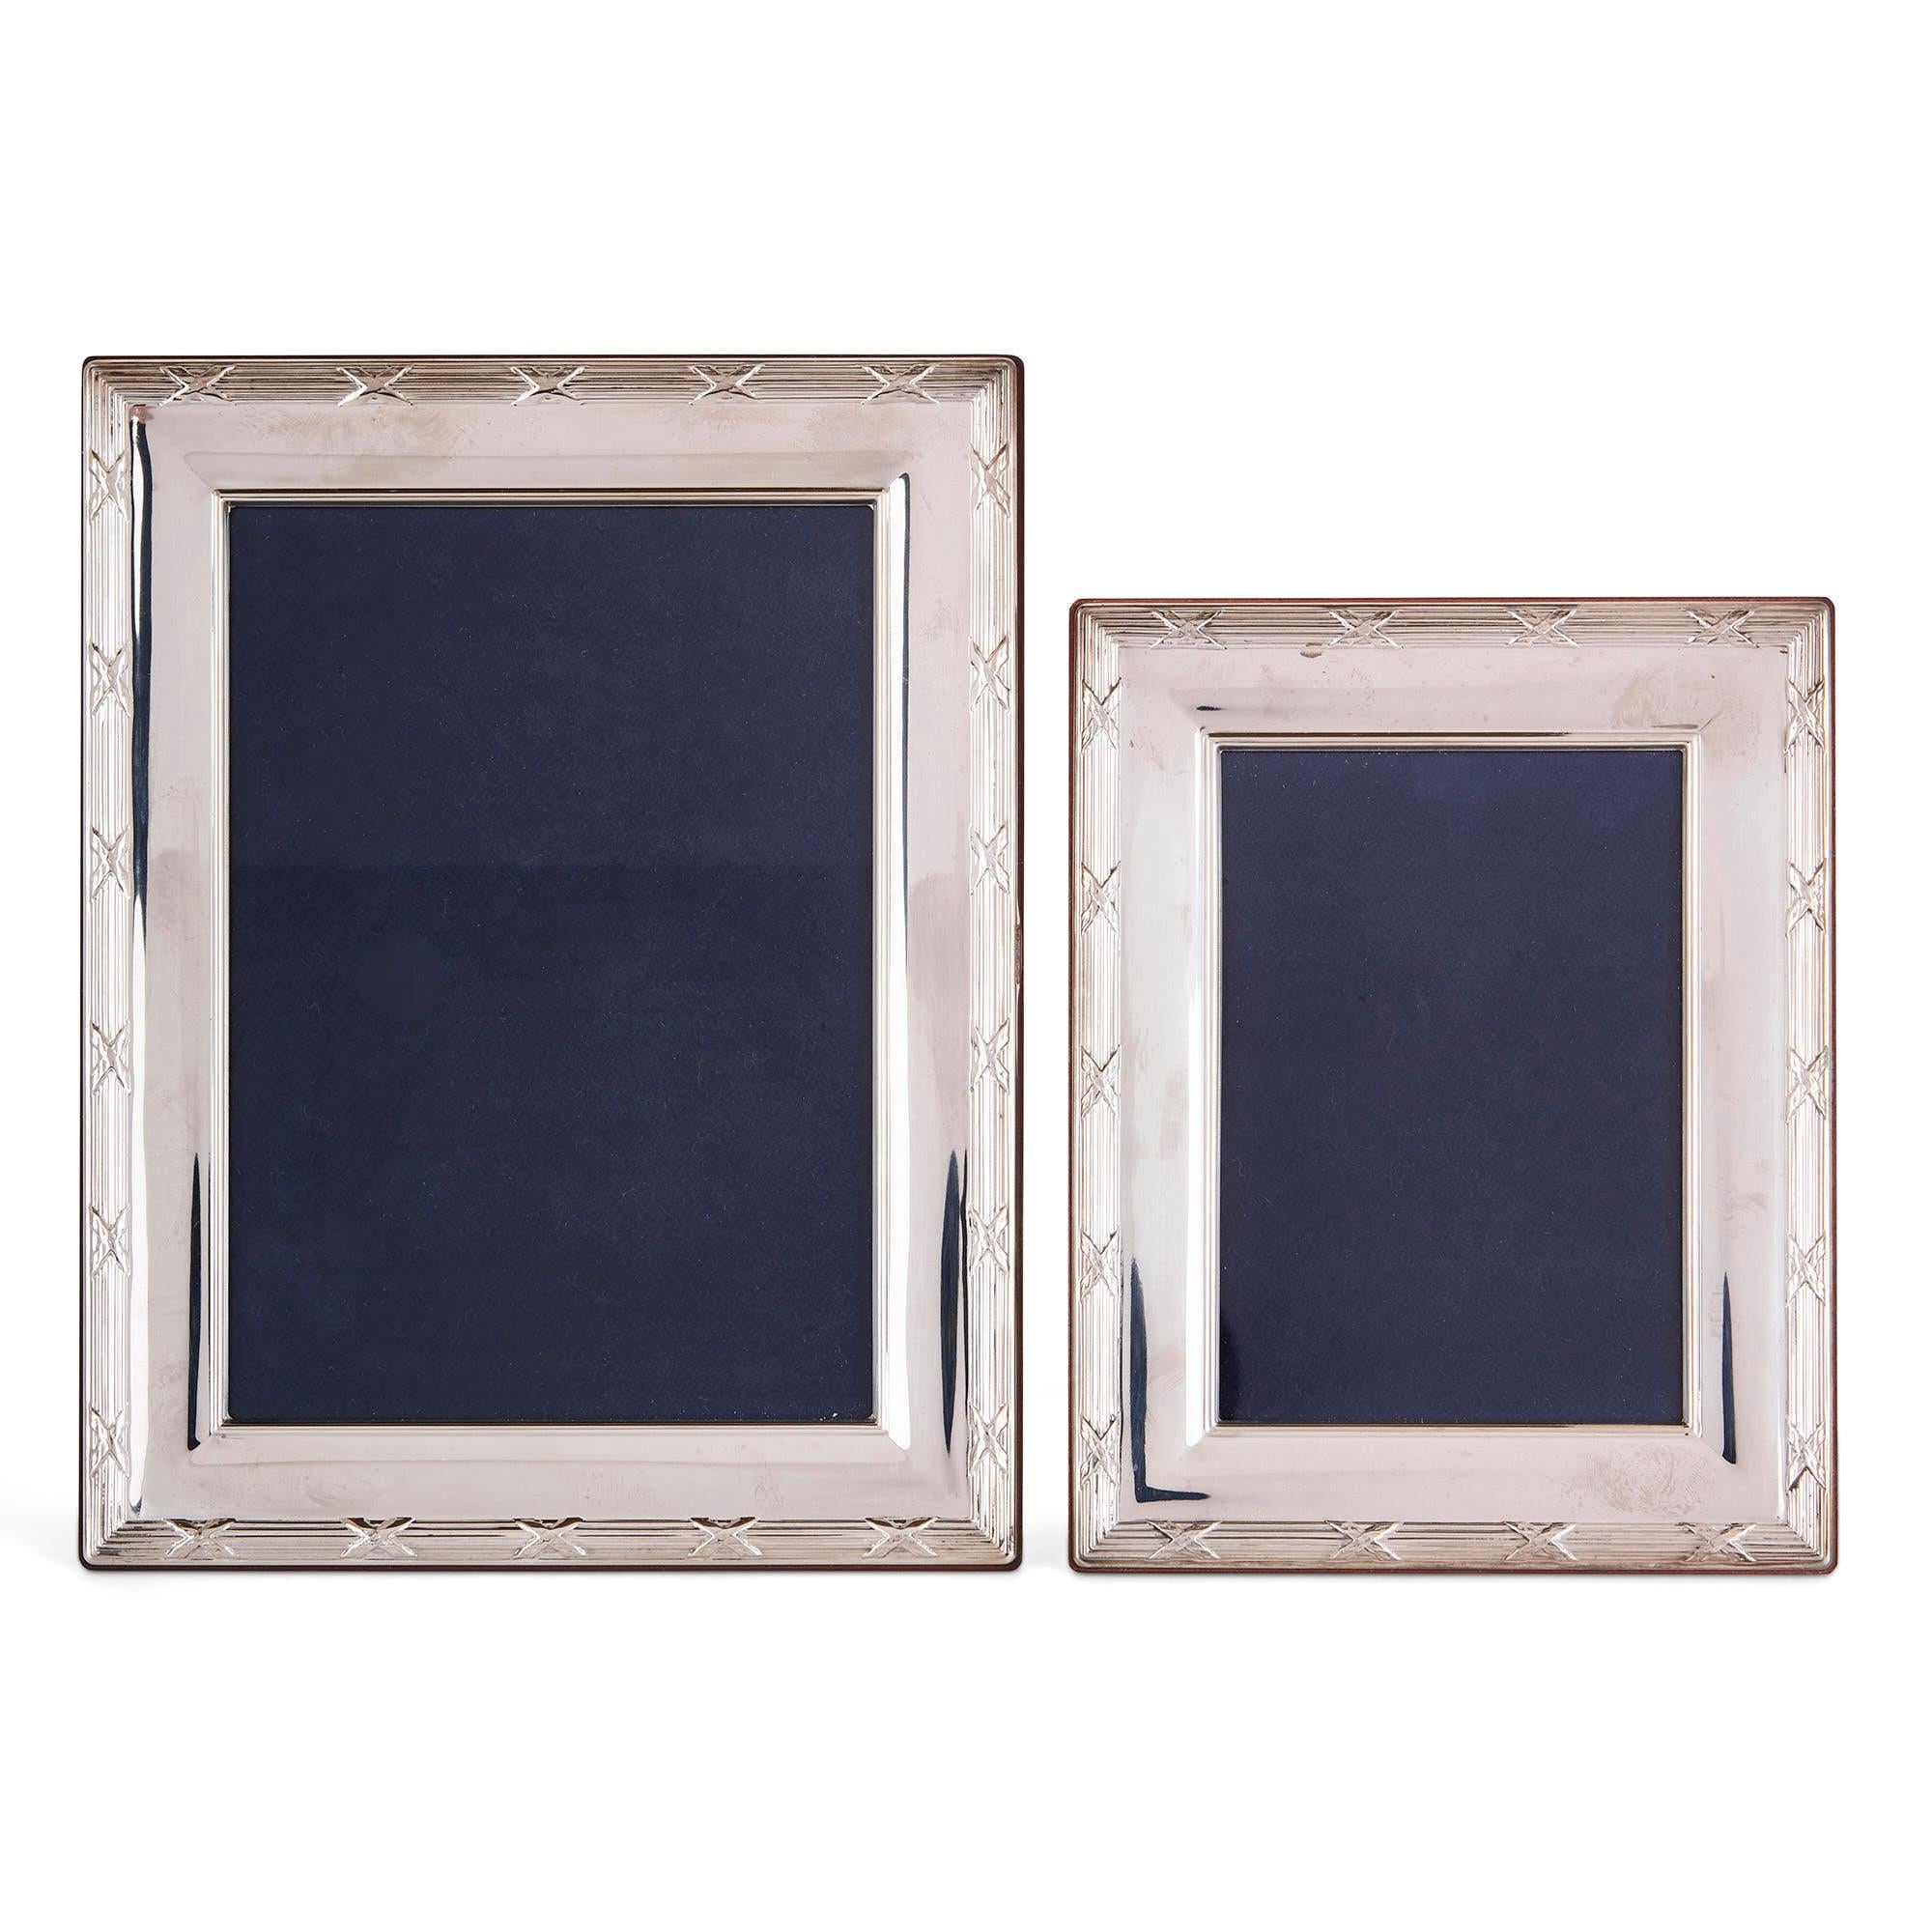 These elegant silver frames were made in 2007 by the Carrs Silver company in Sheffield, England. Carrs Silver was founded in 1977 by Ron Carrs and it is still in business today. The firm specialises in the production of luxury silver items,